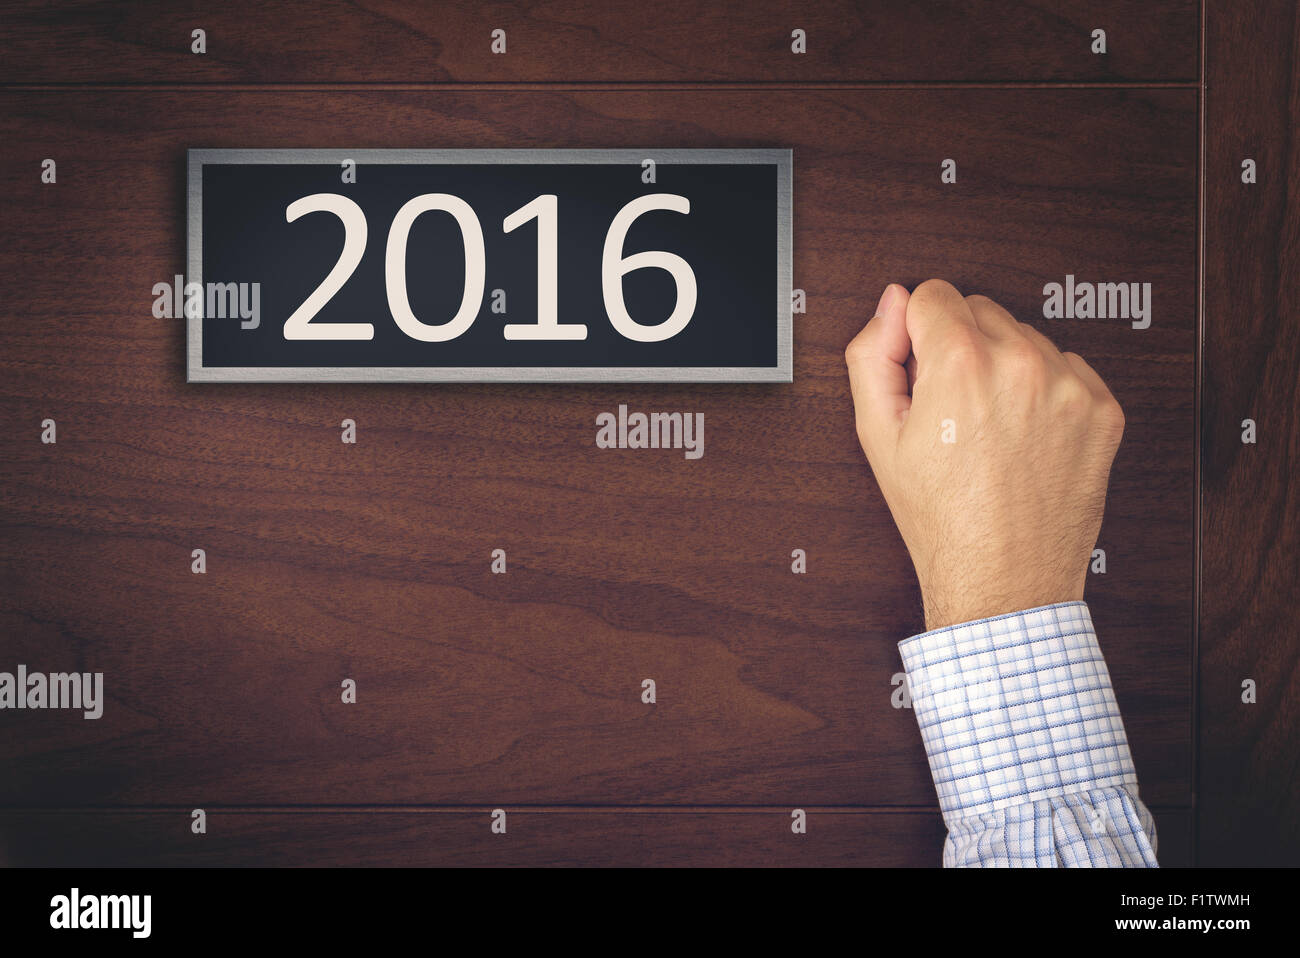 New Year 2016 Resolutions, Businessman Knocking on the Door with Number 2016. Stock Photo